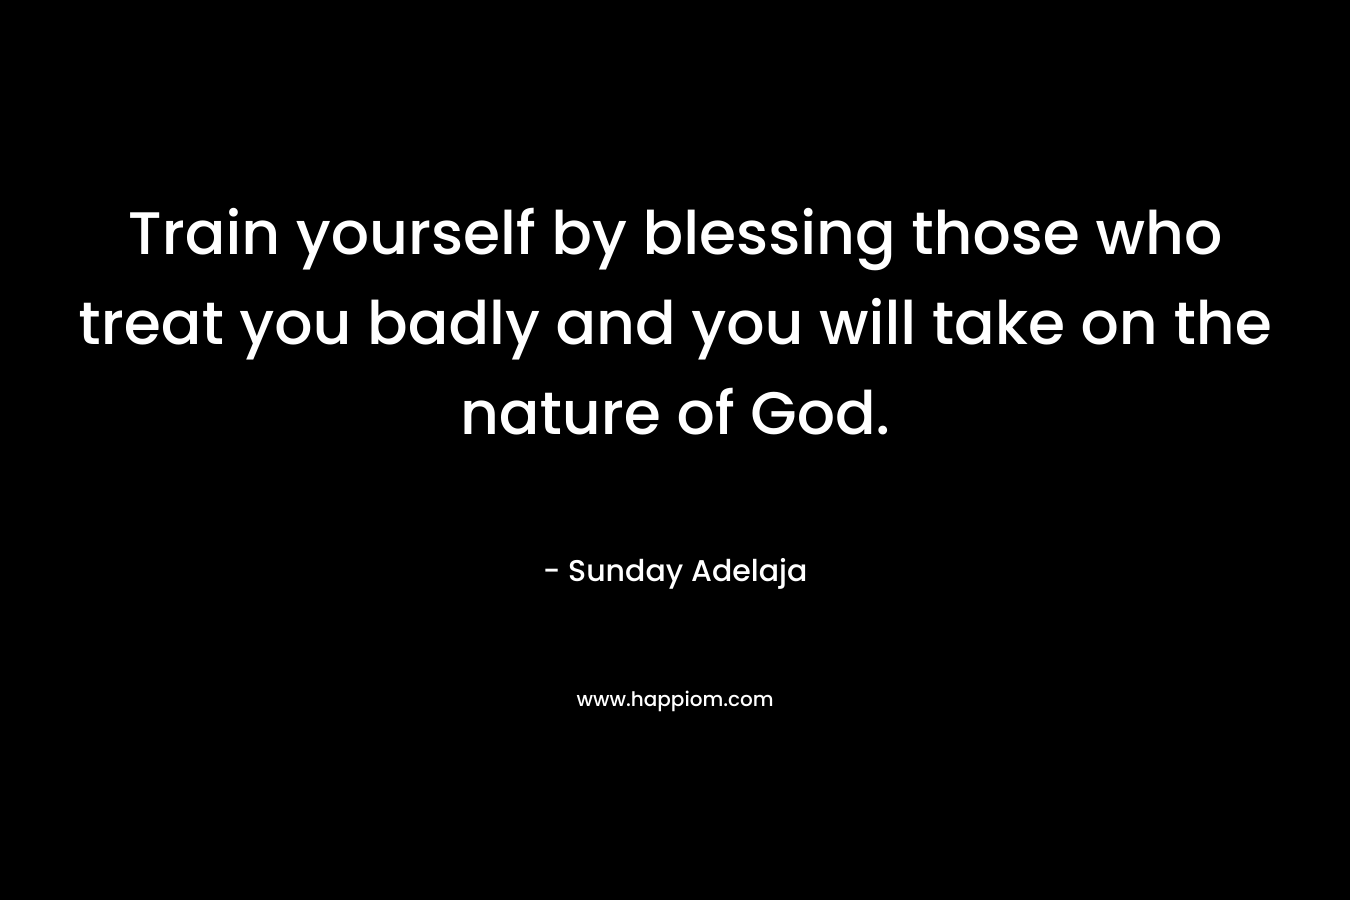 Train yourself by blessing those who treat you badly and you will take on the nature of God.